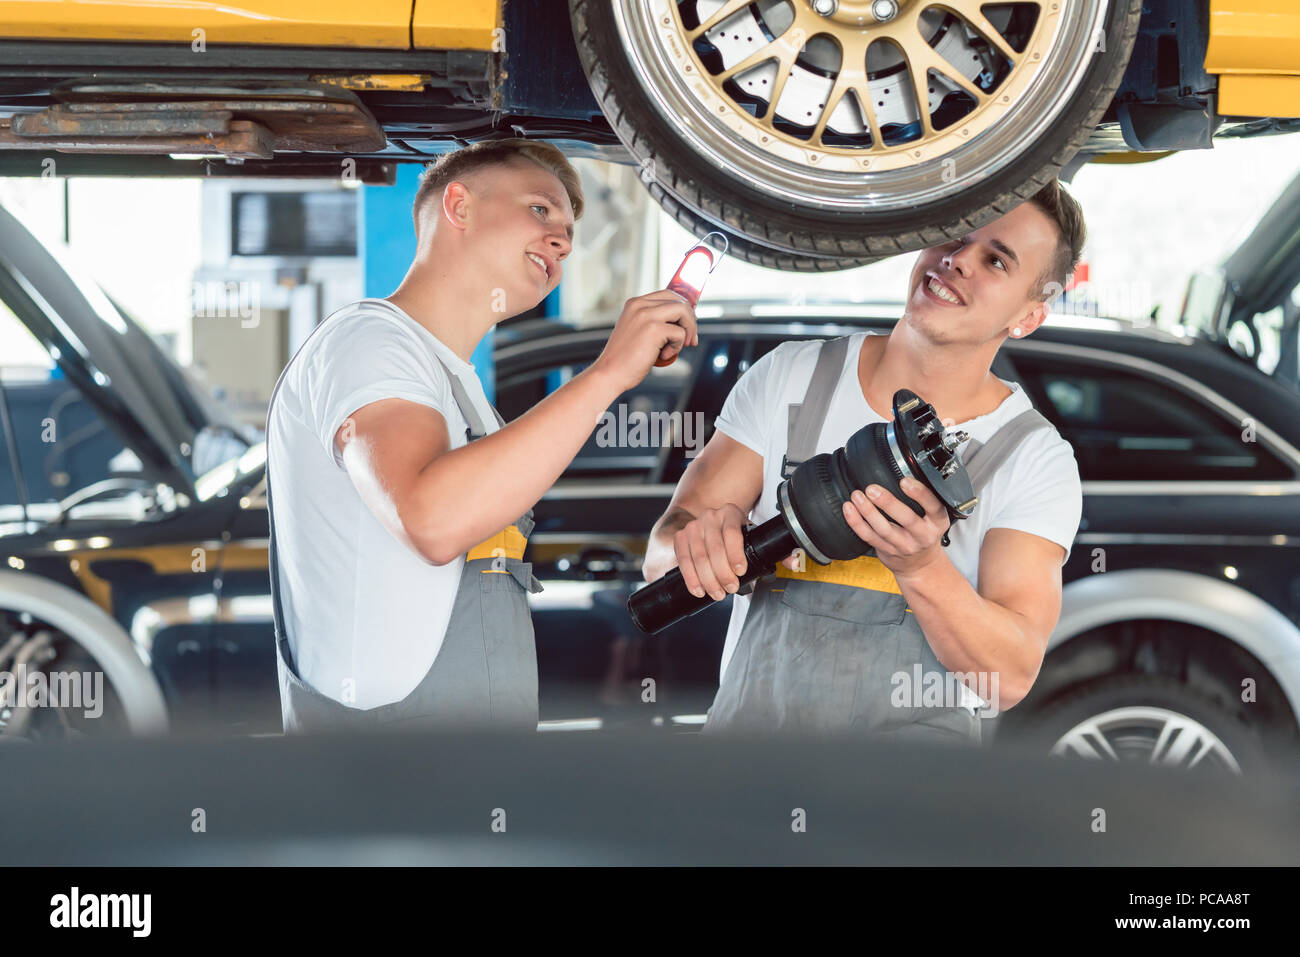 Two auto mechanics analyzing the rims of a lifted car Stock Photo